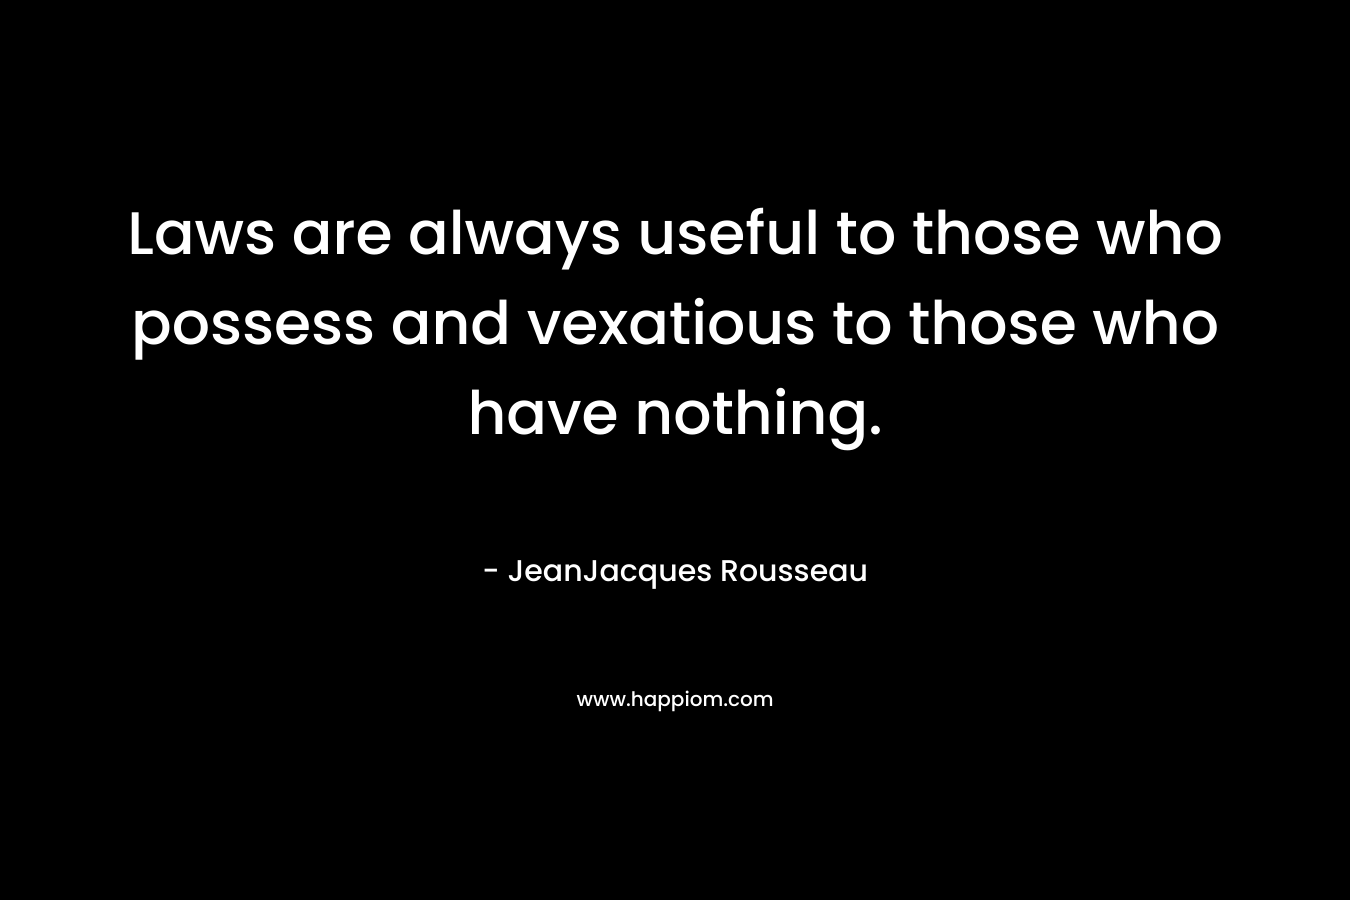 Laws are always useful to those who possess and vexatious to those who have nothing. – JeanJacques Rousseau